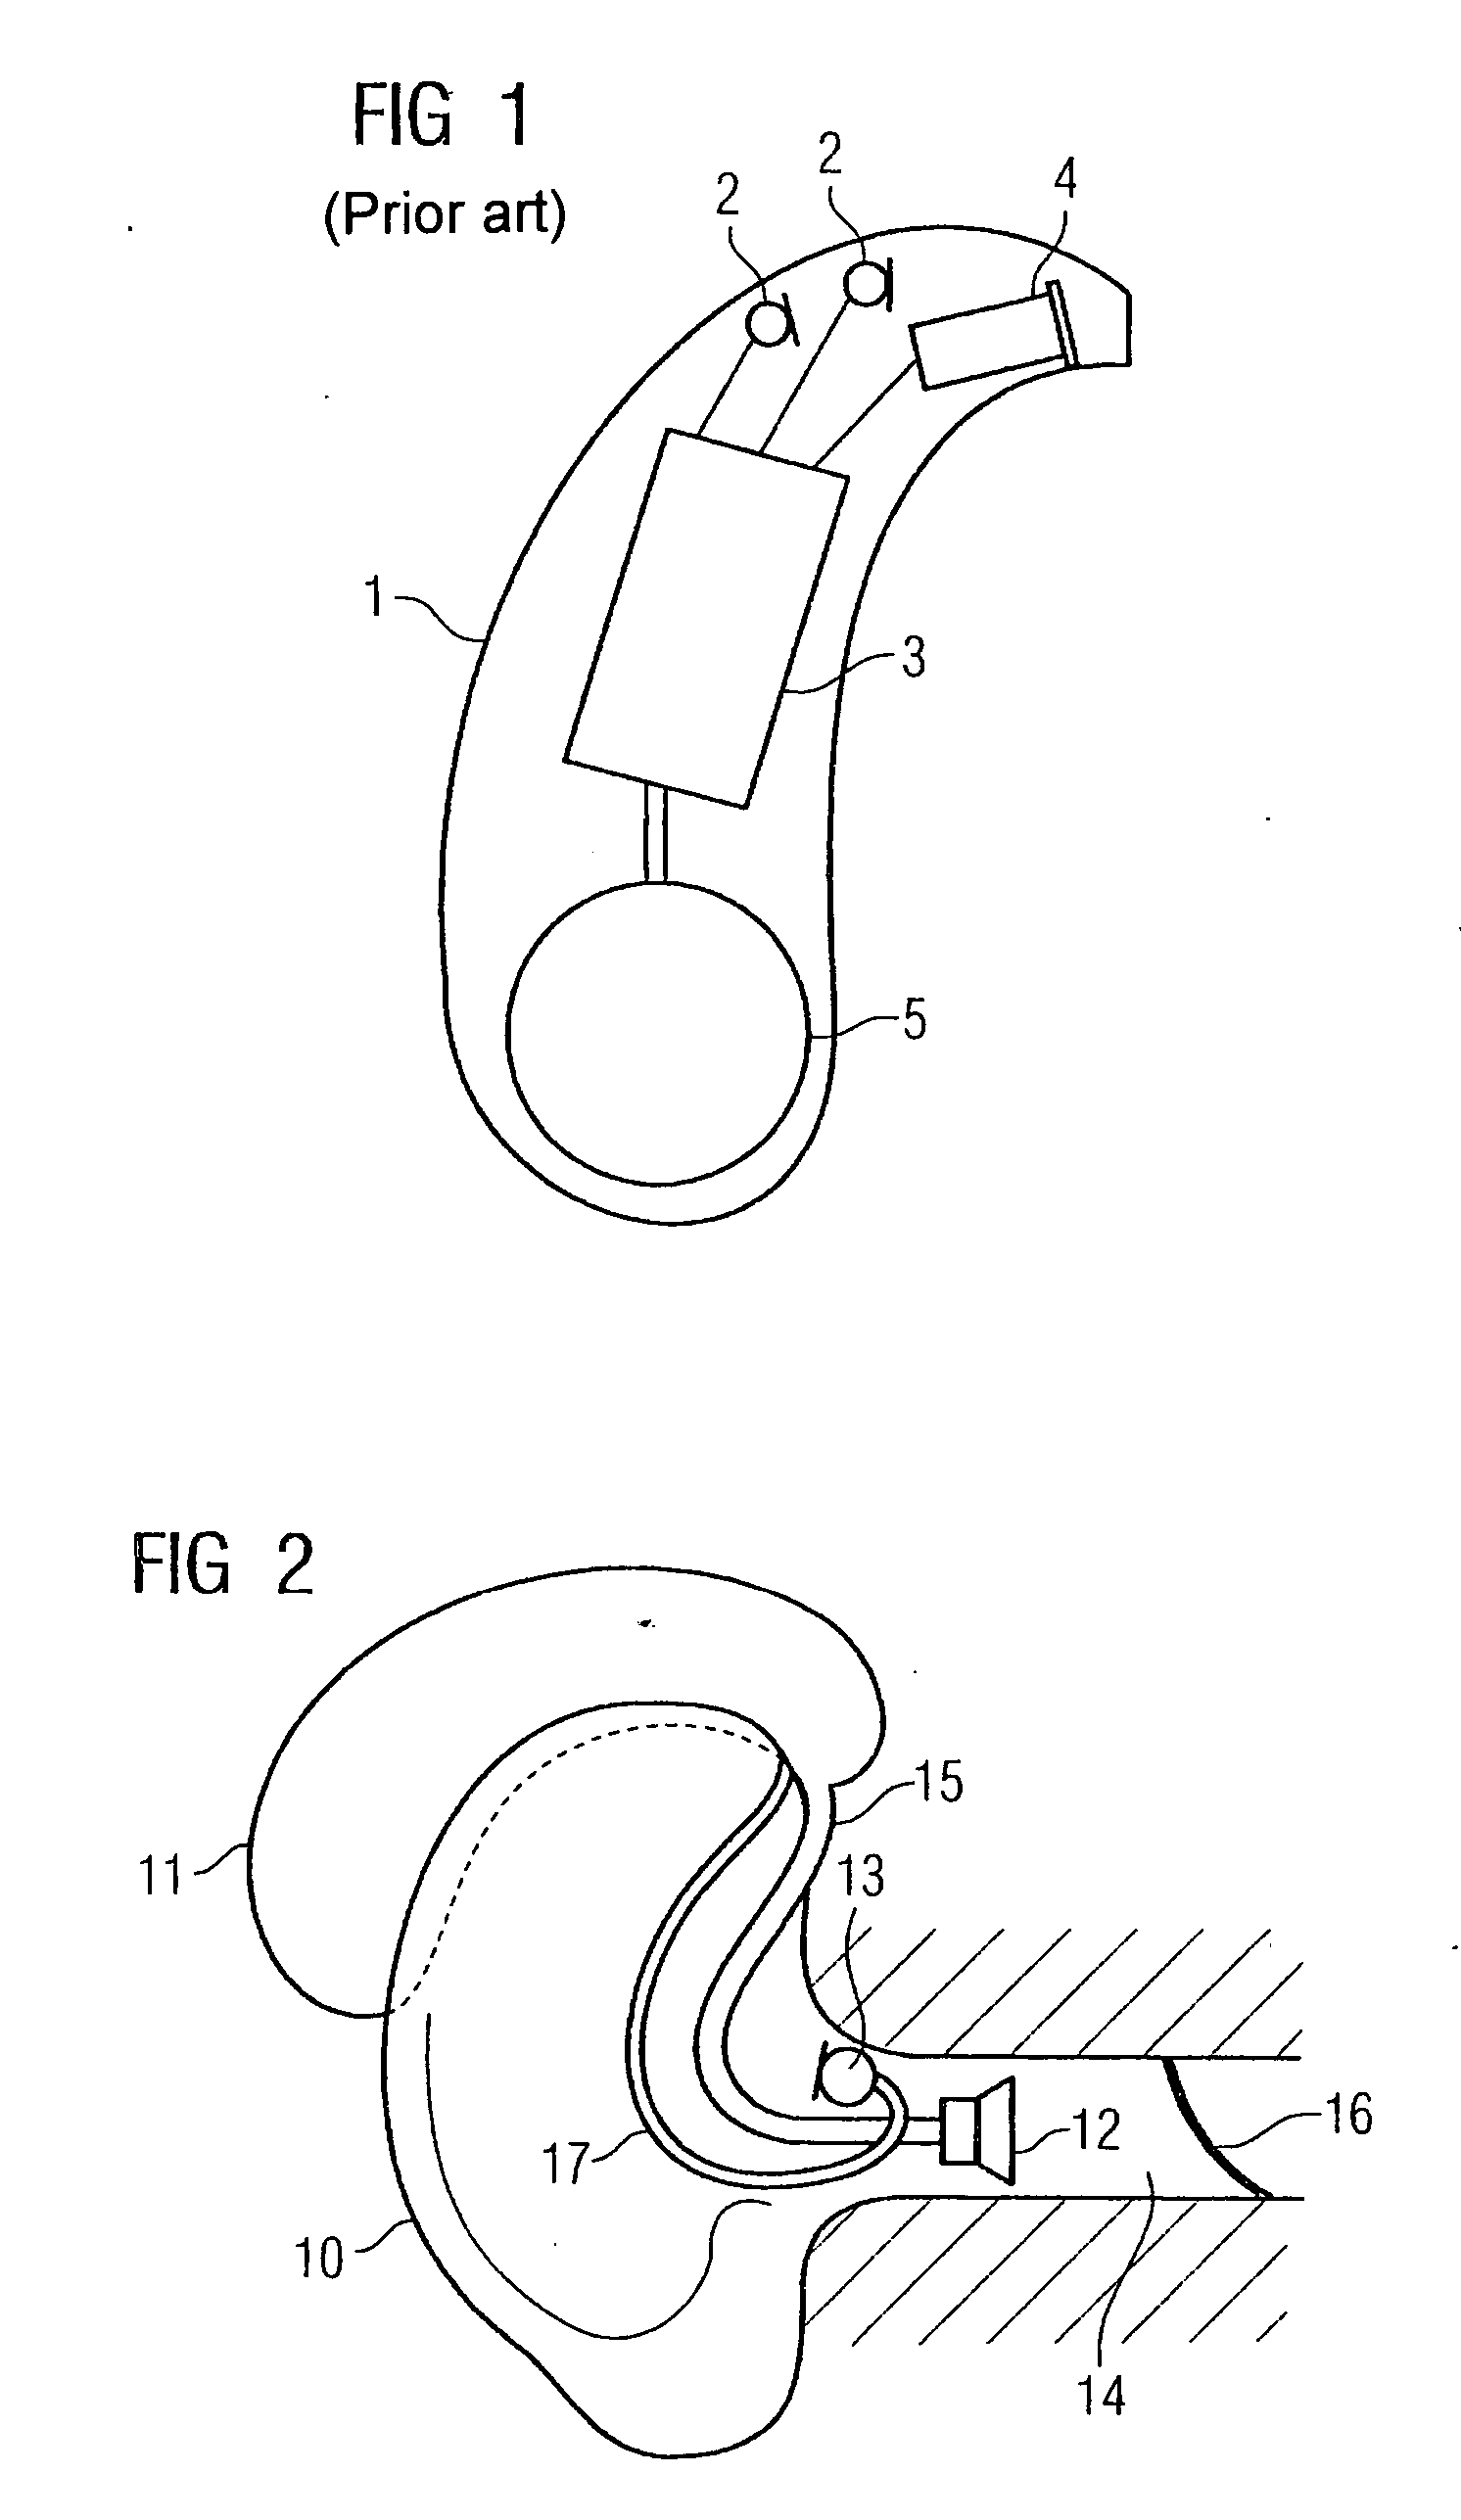 Behind-the-ear hearing device having an external, optical microphone